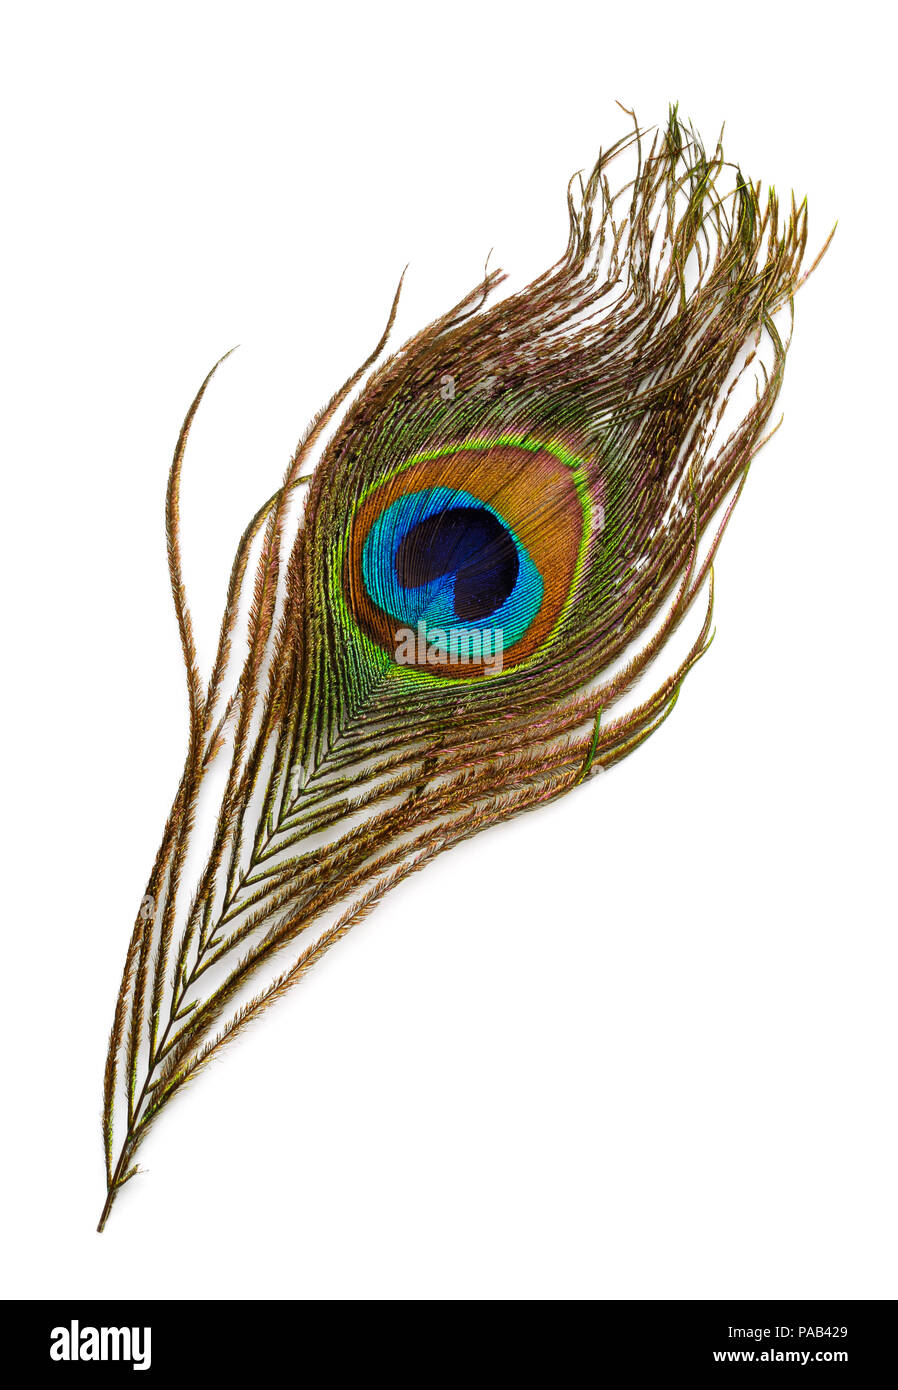 Top view of peacock feather isolated on white Stock Photo